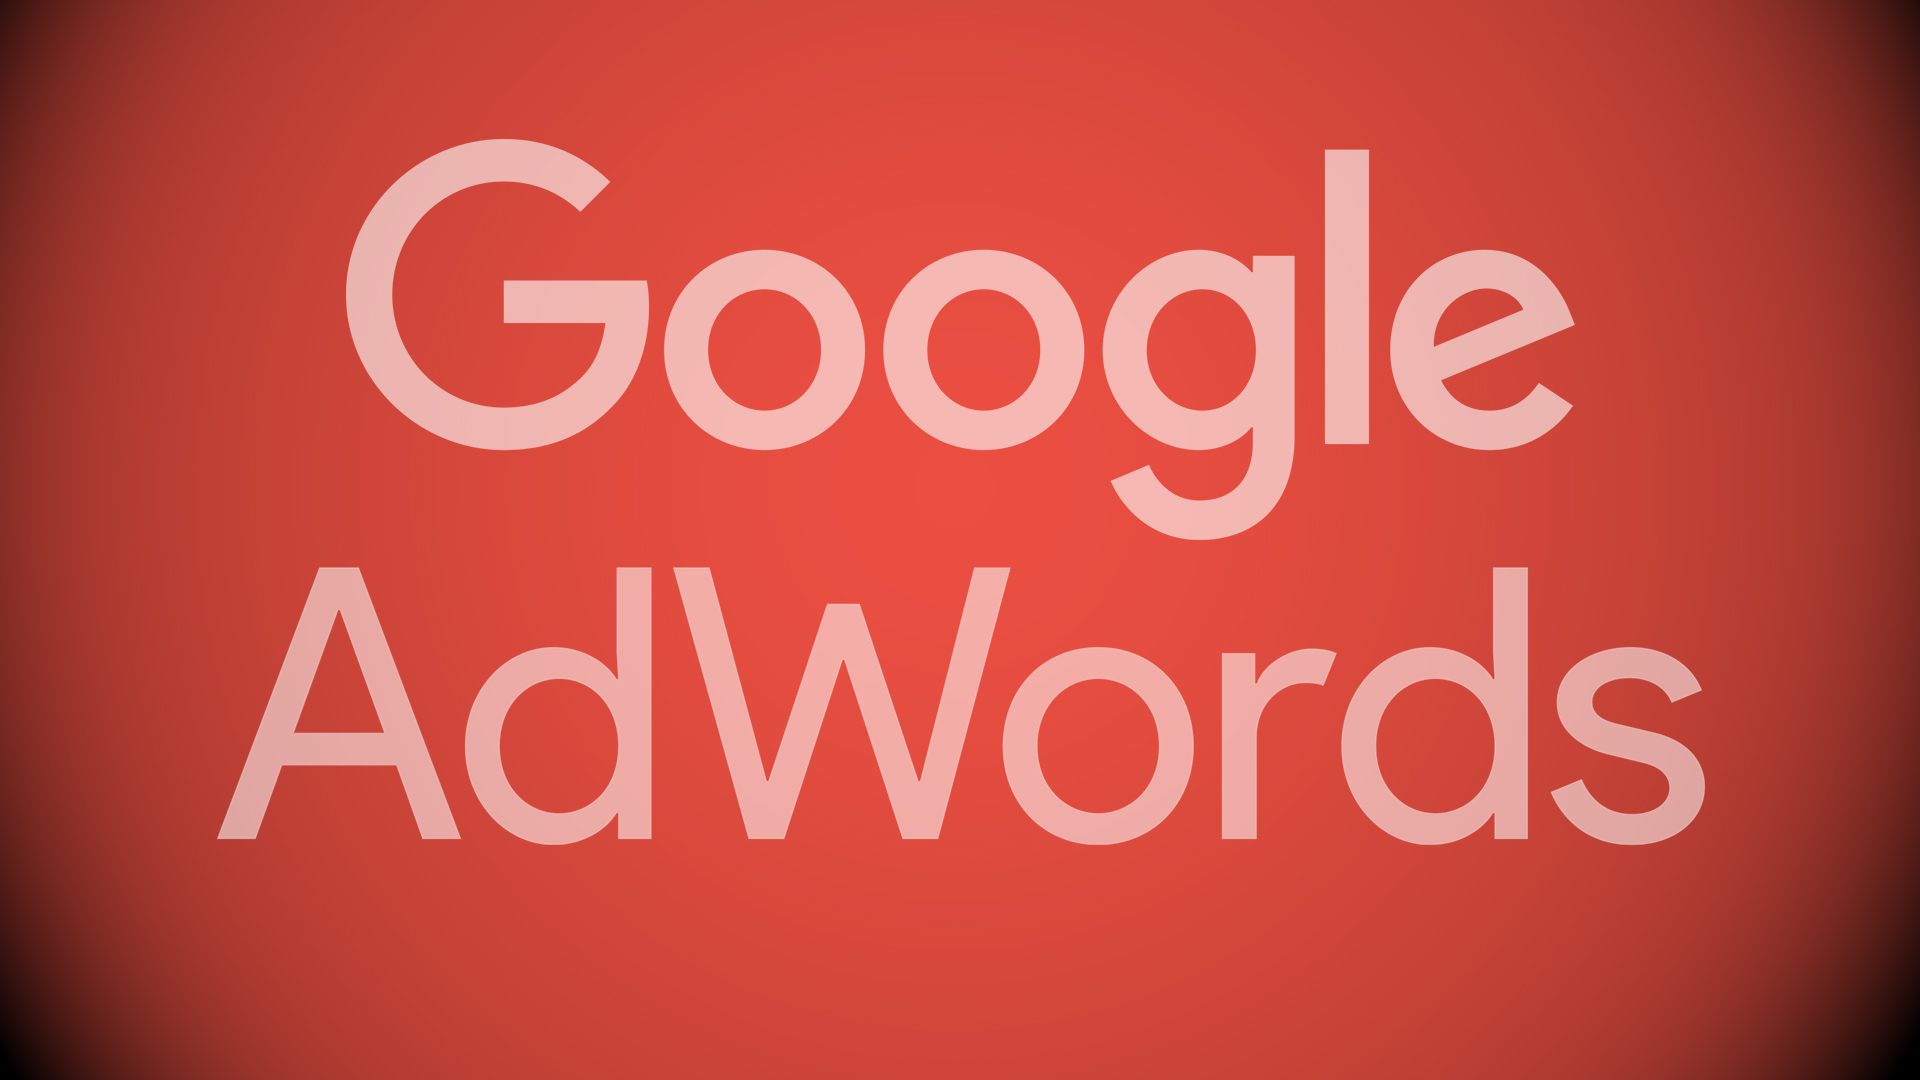 google-adwords-red1-1920